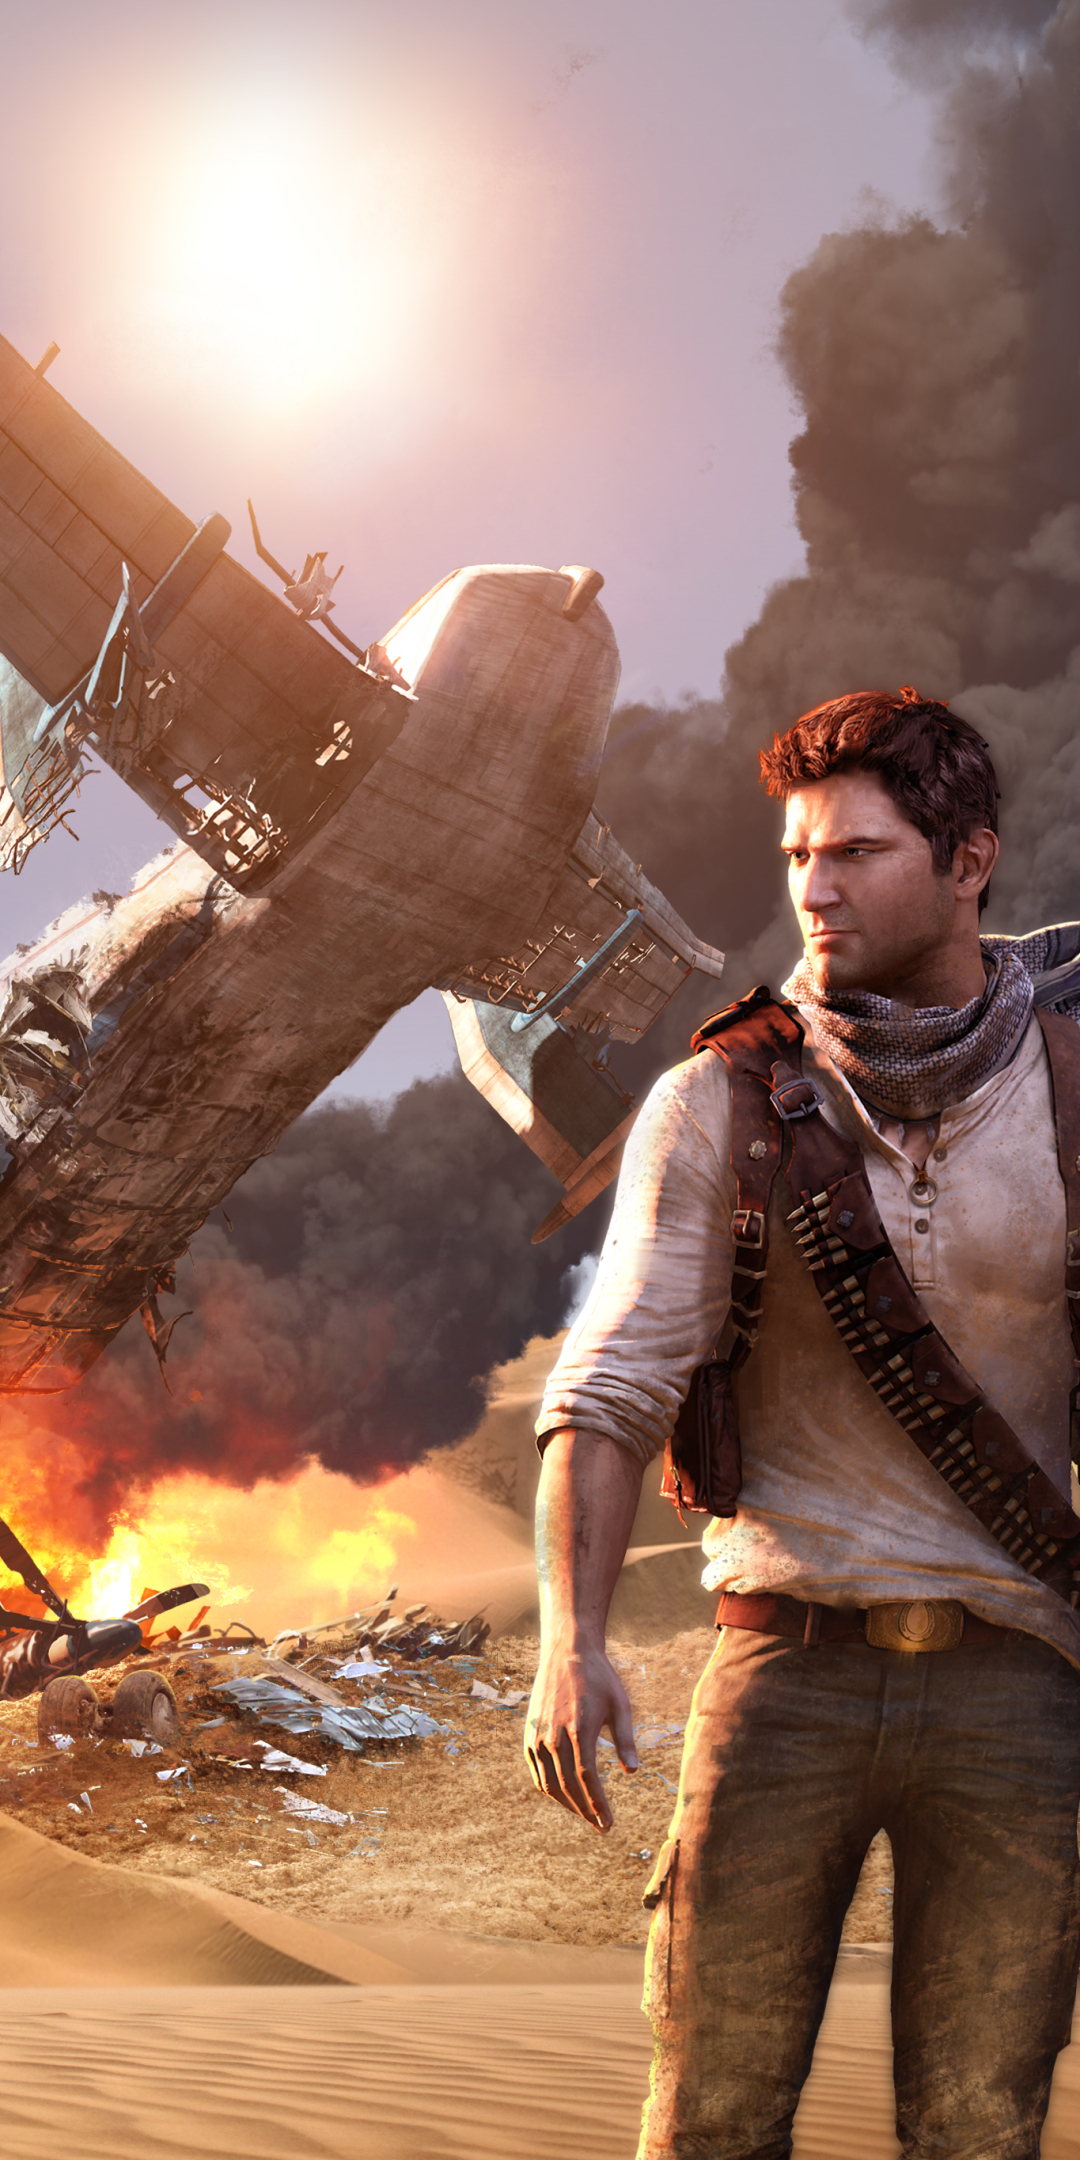 nathan drake, video game, uncharted 3: drake's deception, uncharted